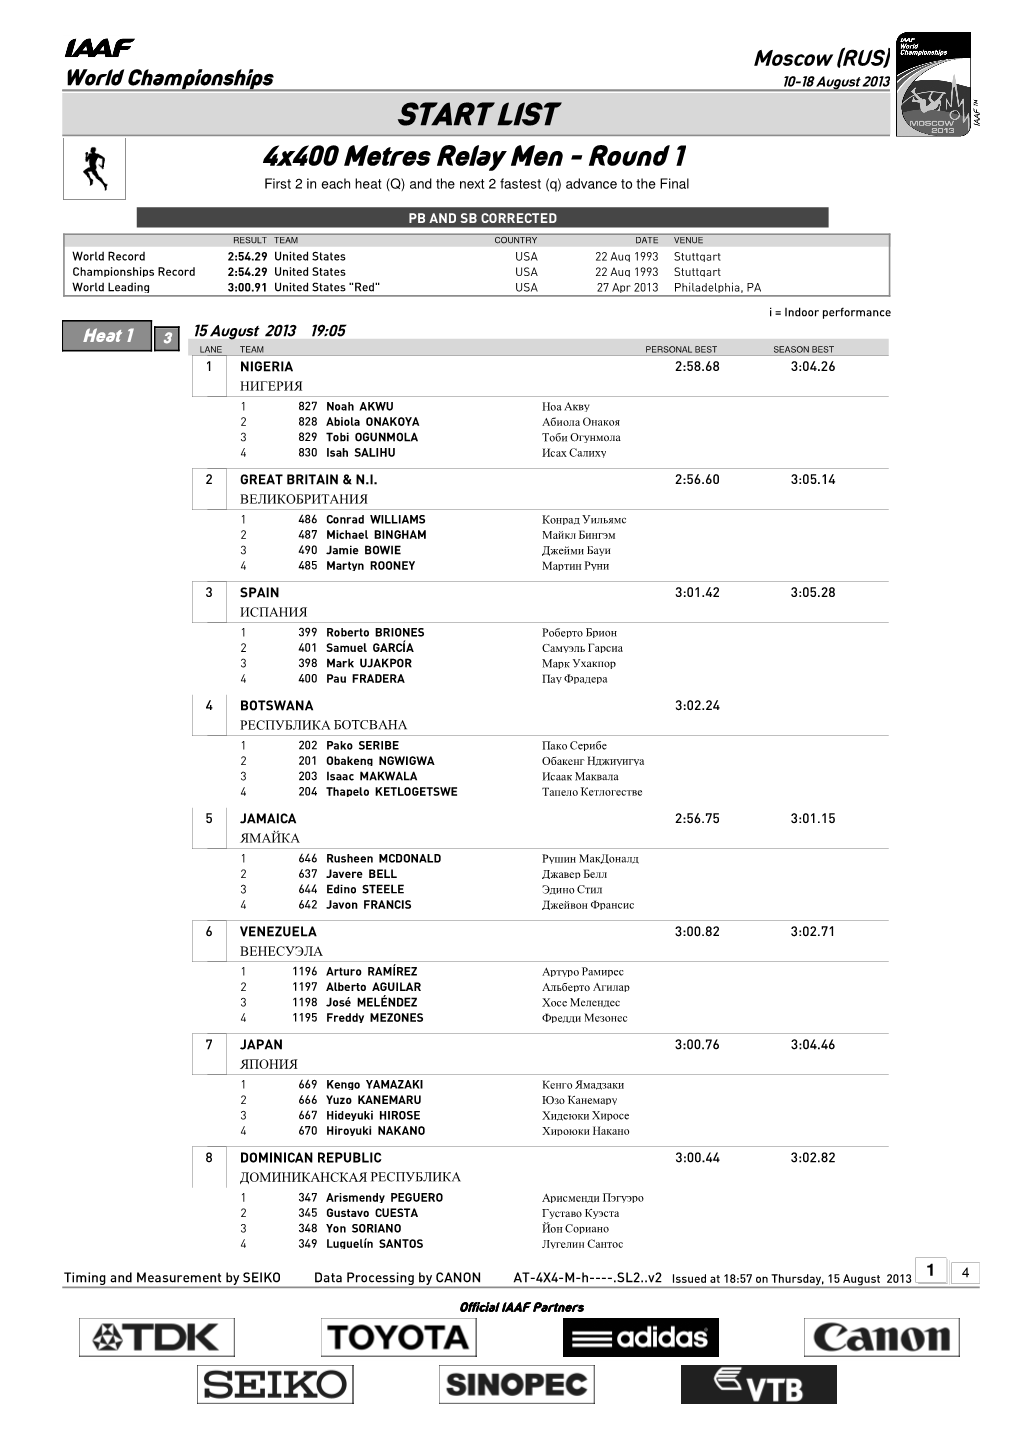 START LIST 4X400 Metres Relay Men - Round 1 First 2 in Each Heat (Q) and the Next 2 Fastest (Q) Advance to the Final